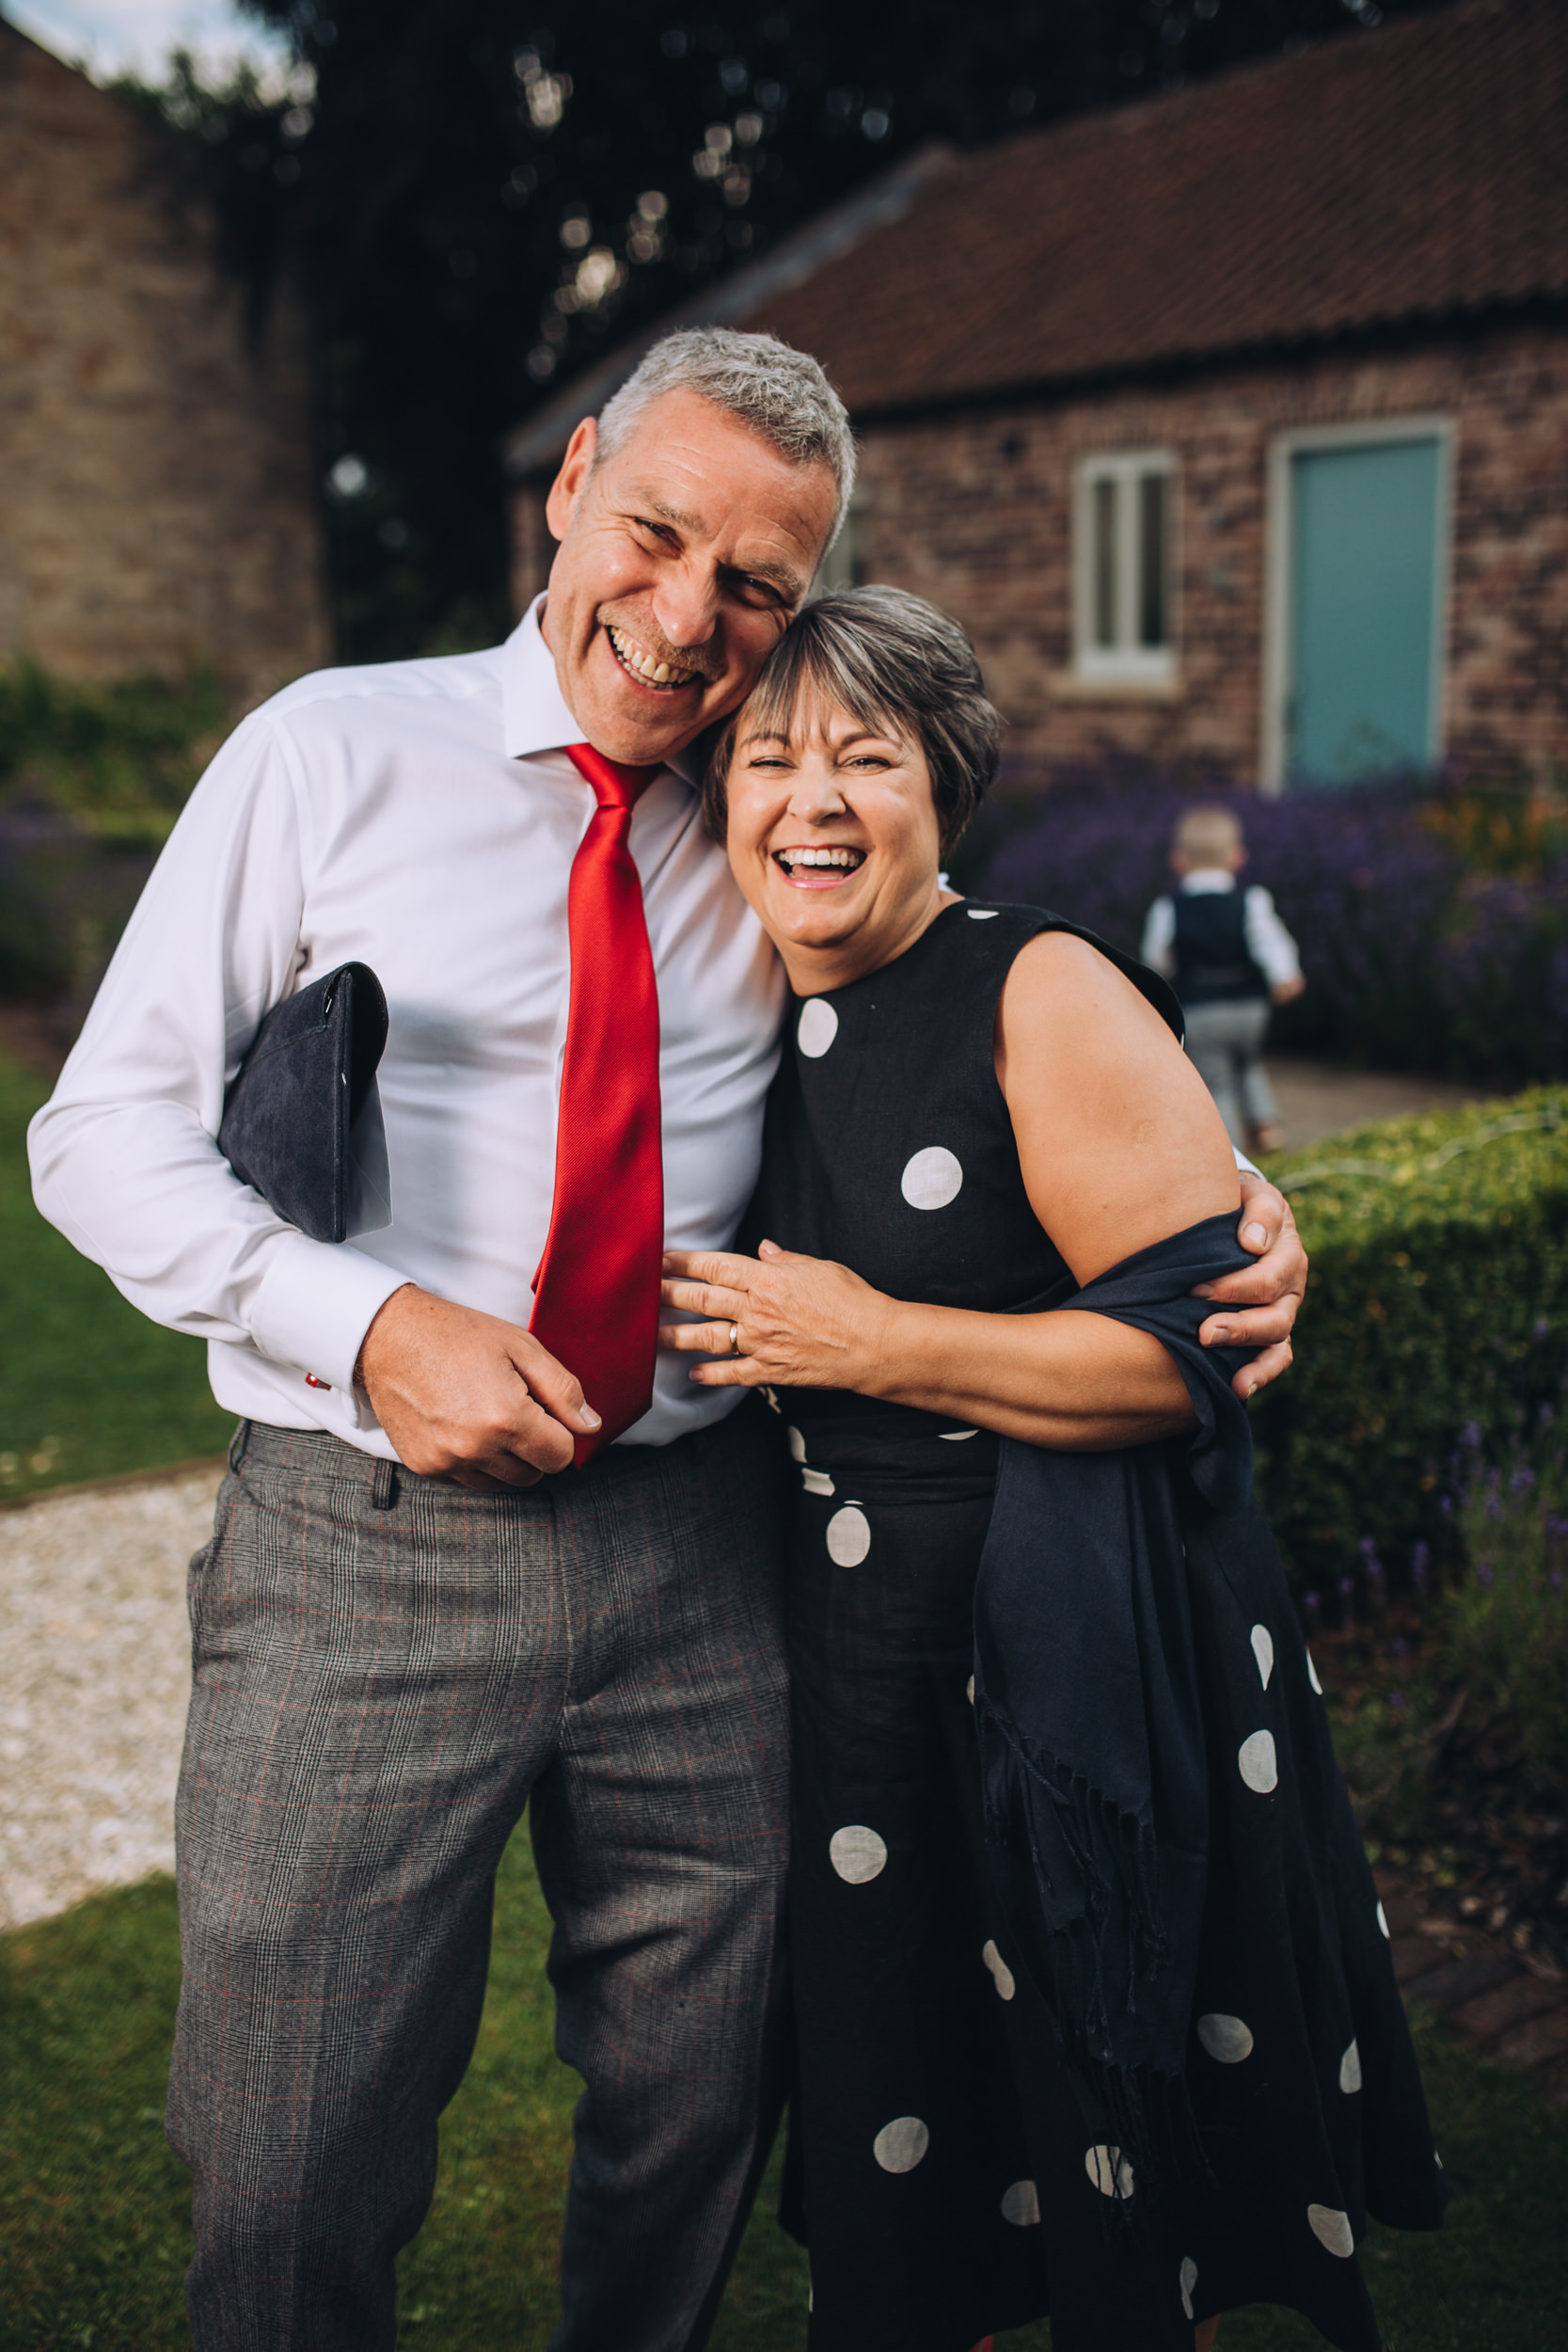 priory cottages wetherby wedding photographers68.jpg